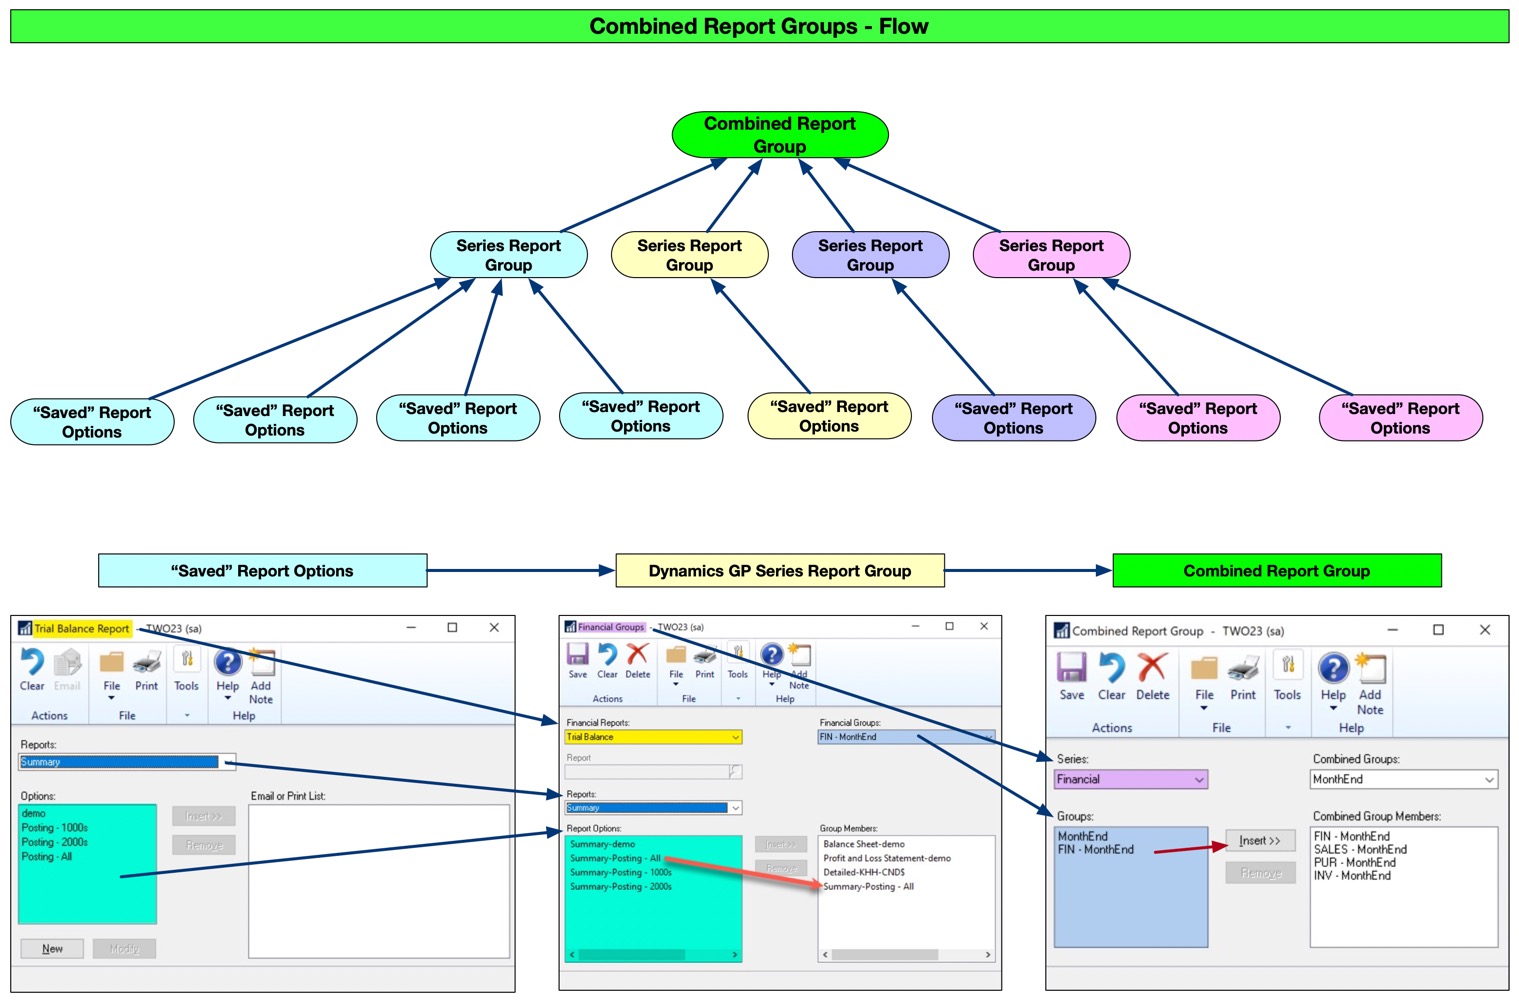 Flow chart of Dex reporting in Dynamics GP 